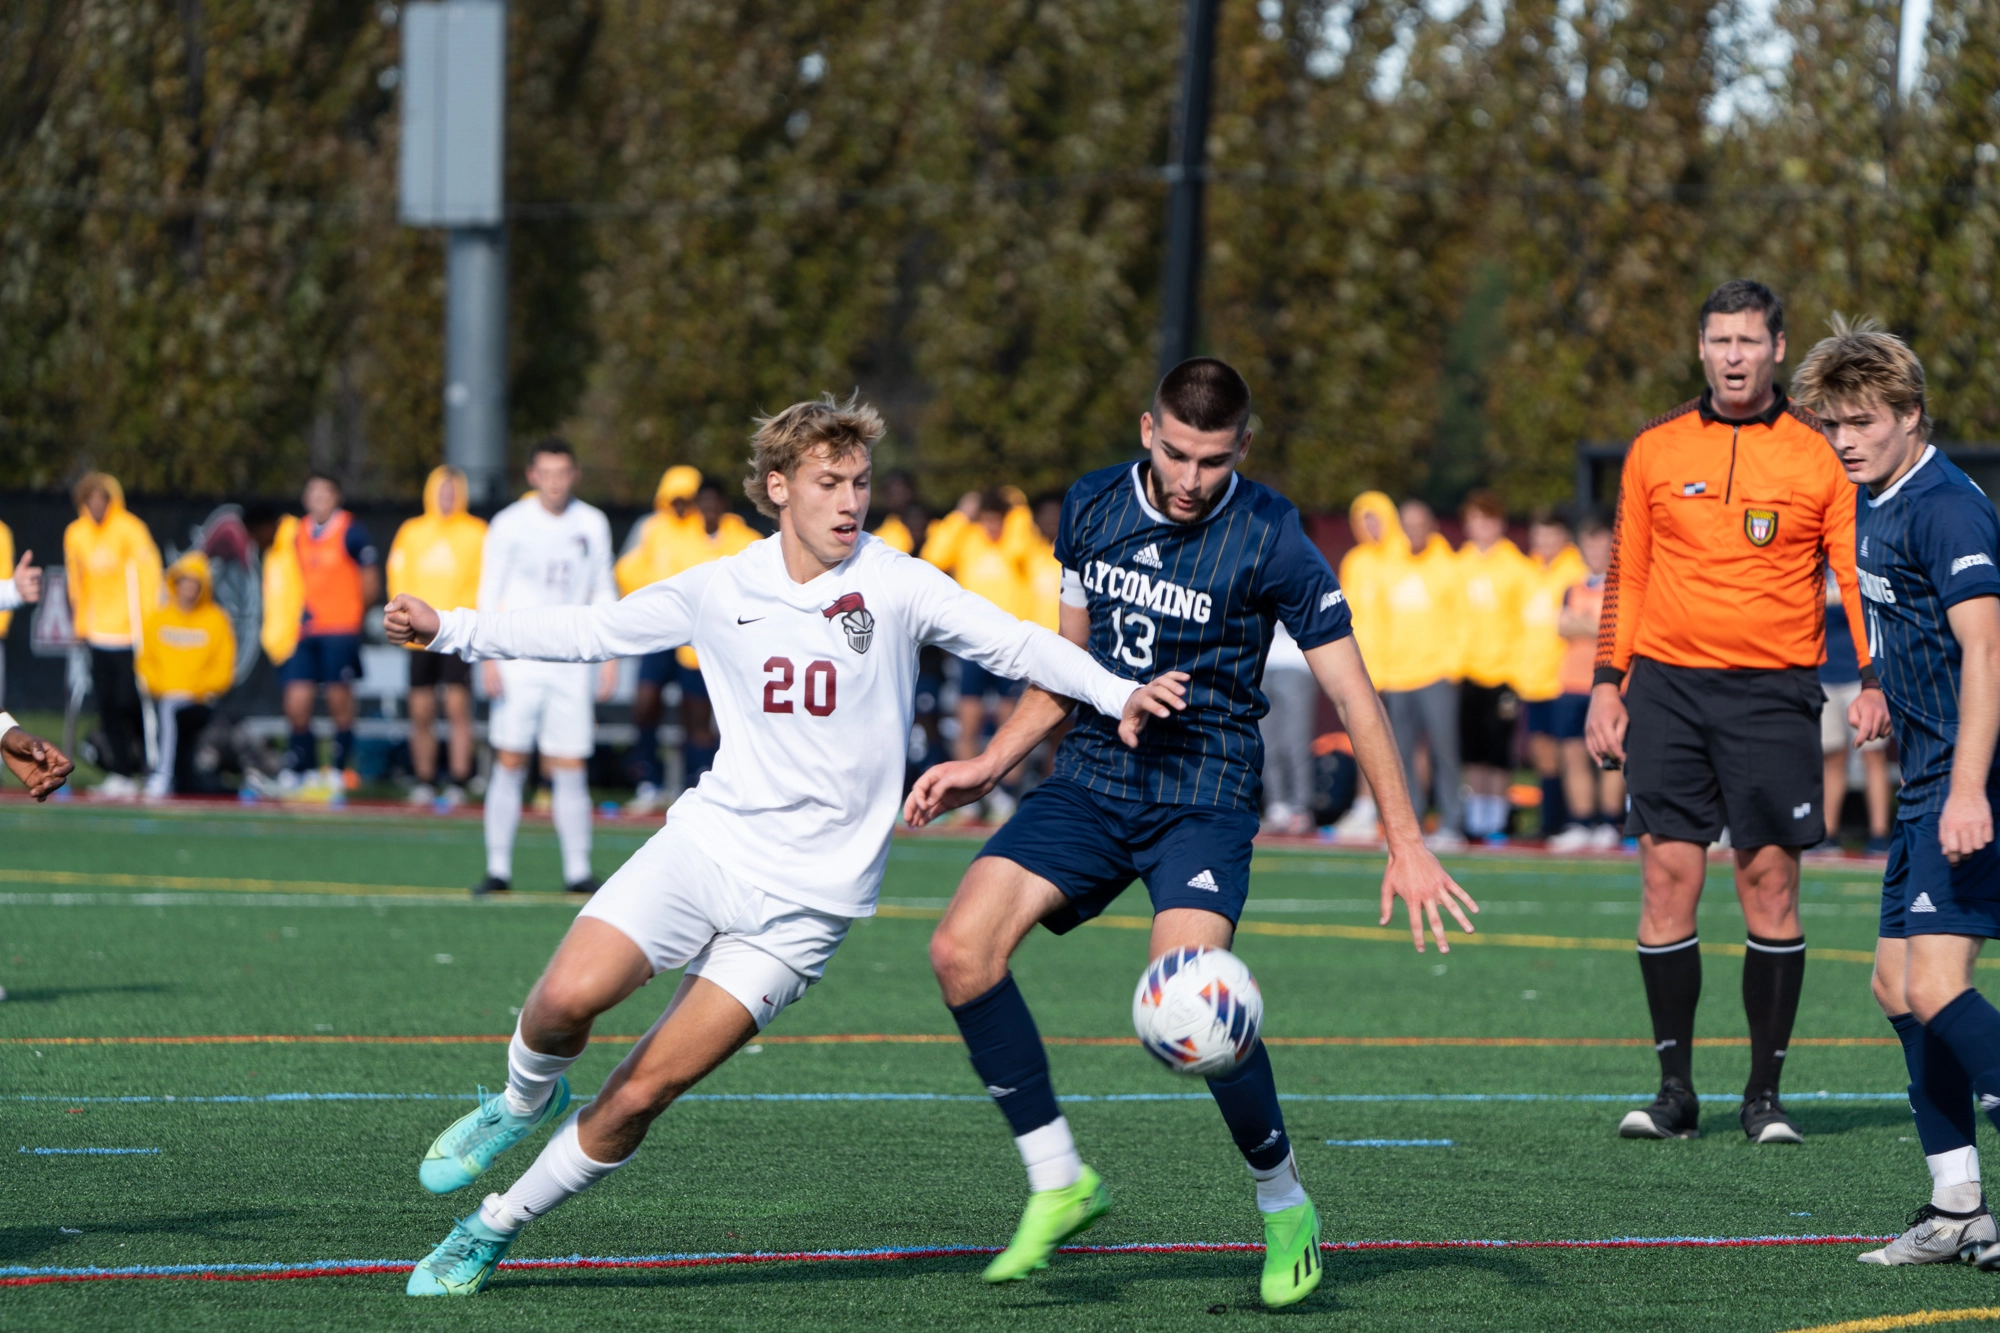 A men's soccer player for the Knights steals the ball from a player for Lycoming 